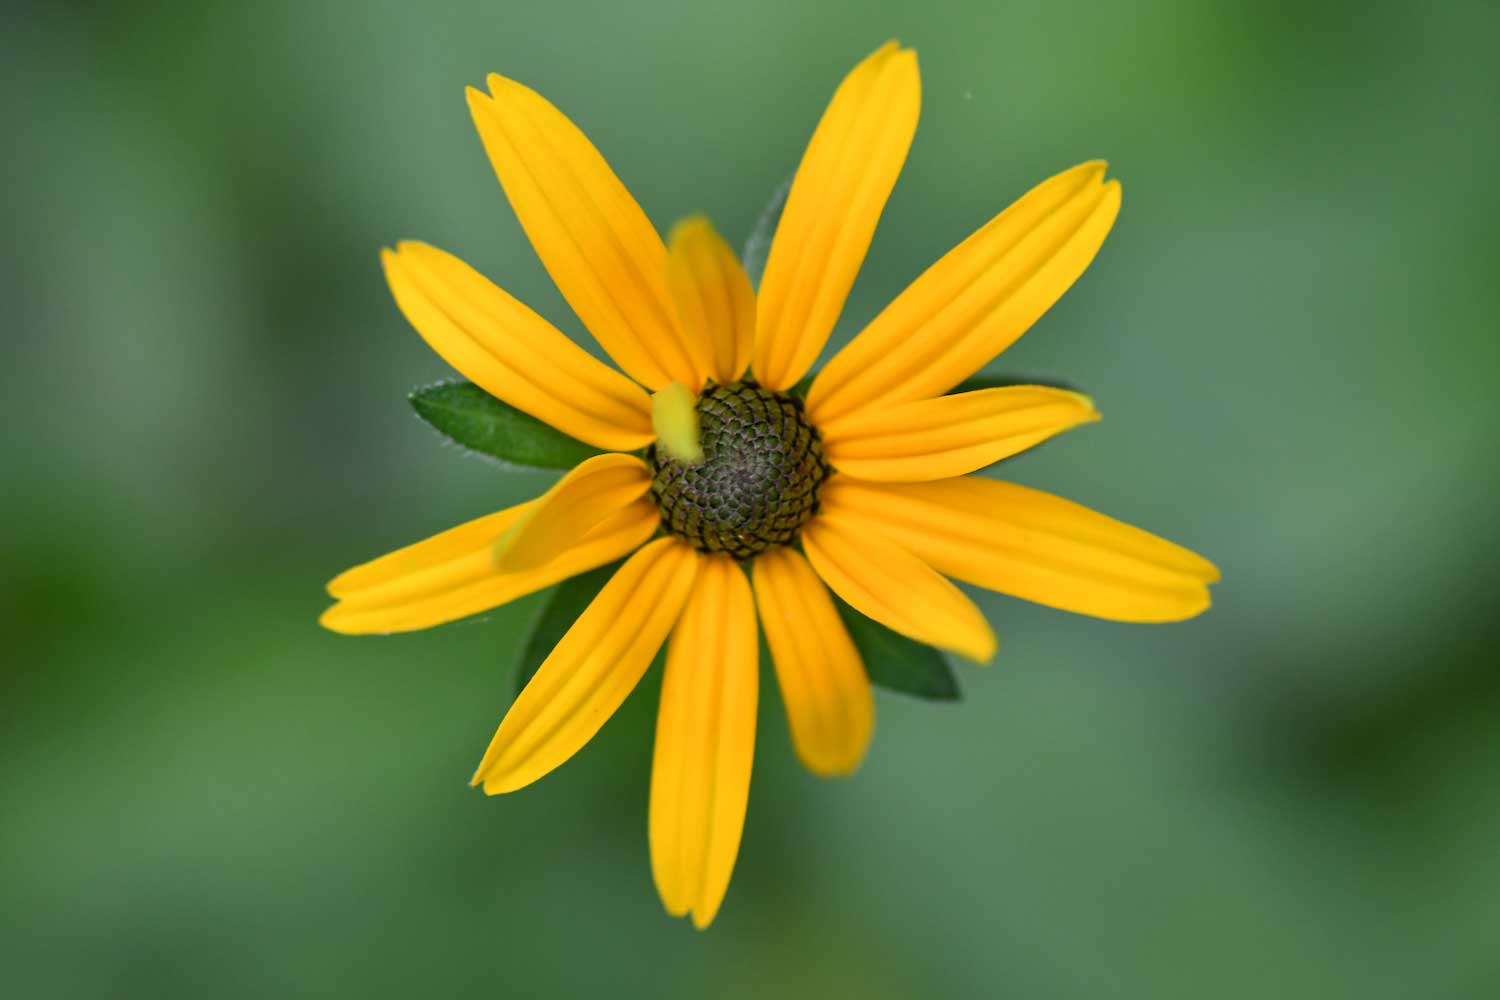 A yellow coneflower bloom.